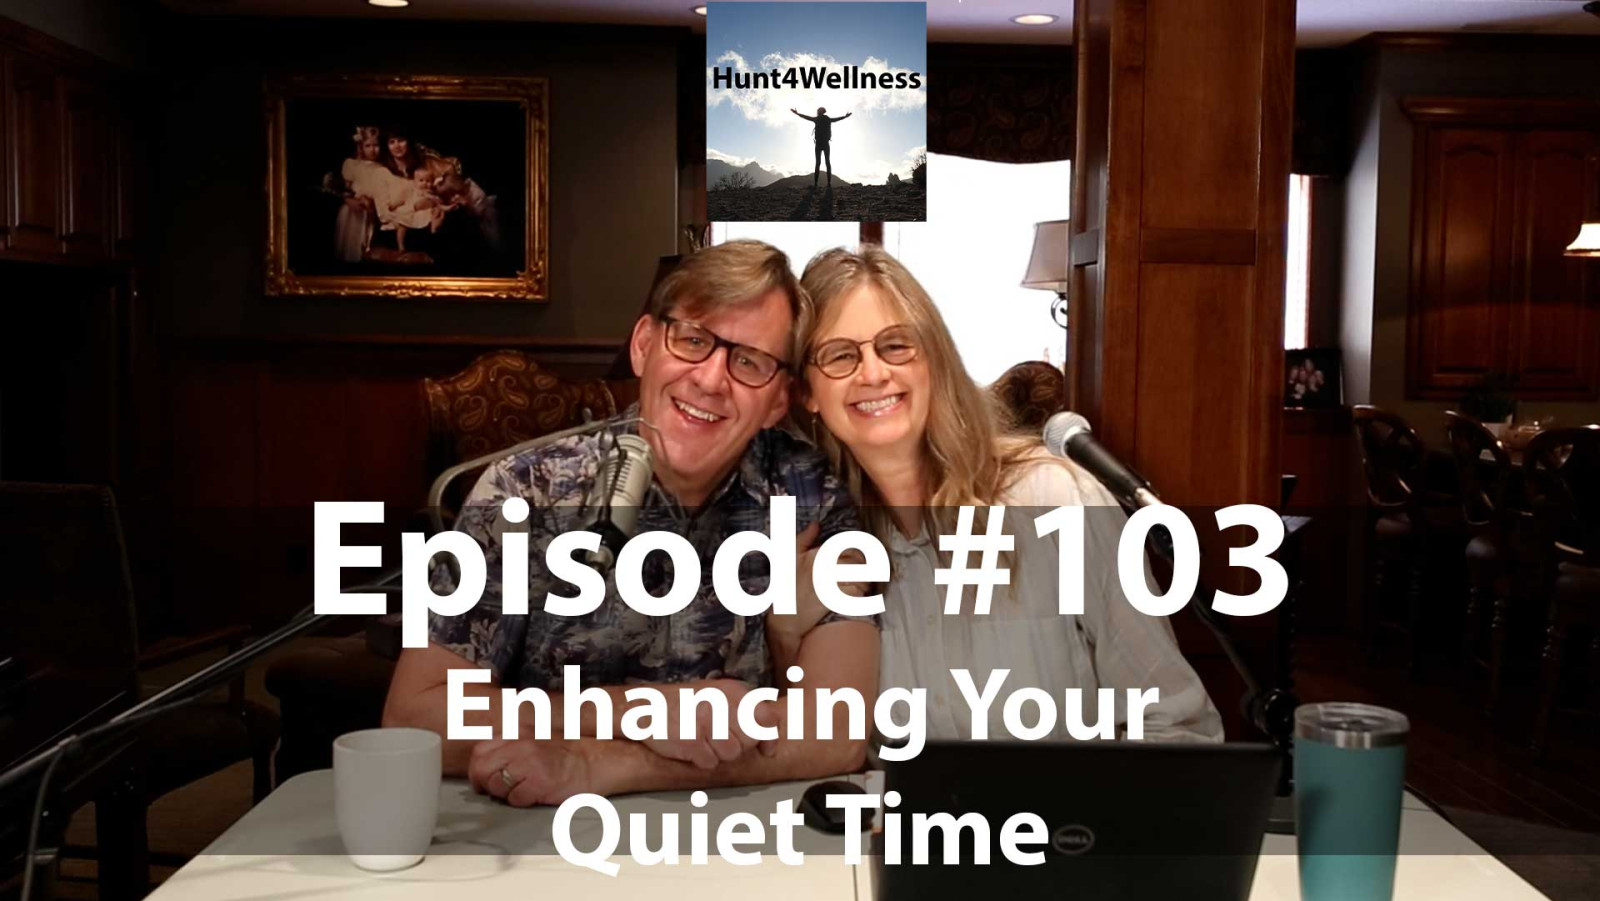 Episode #103 - Enhancing Your Quiet Time